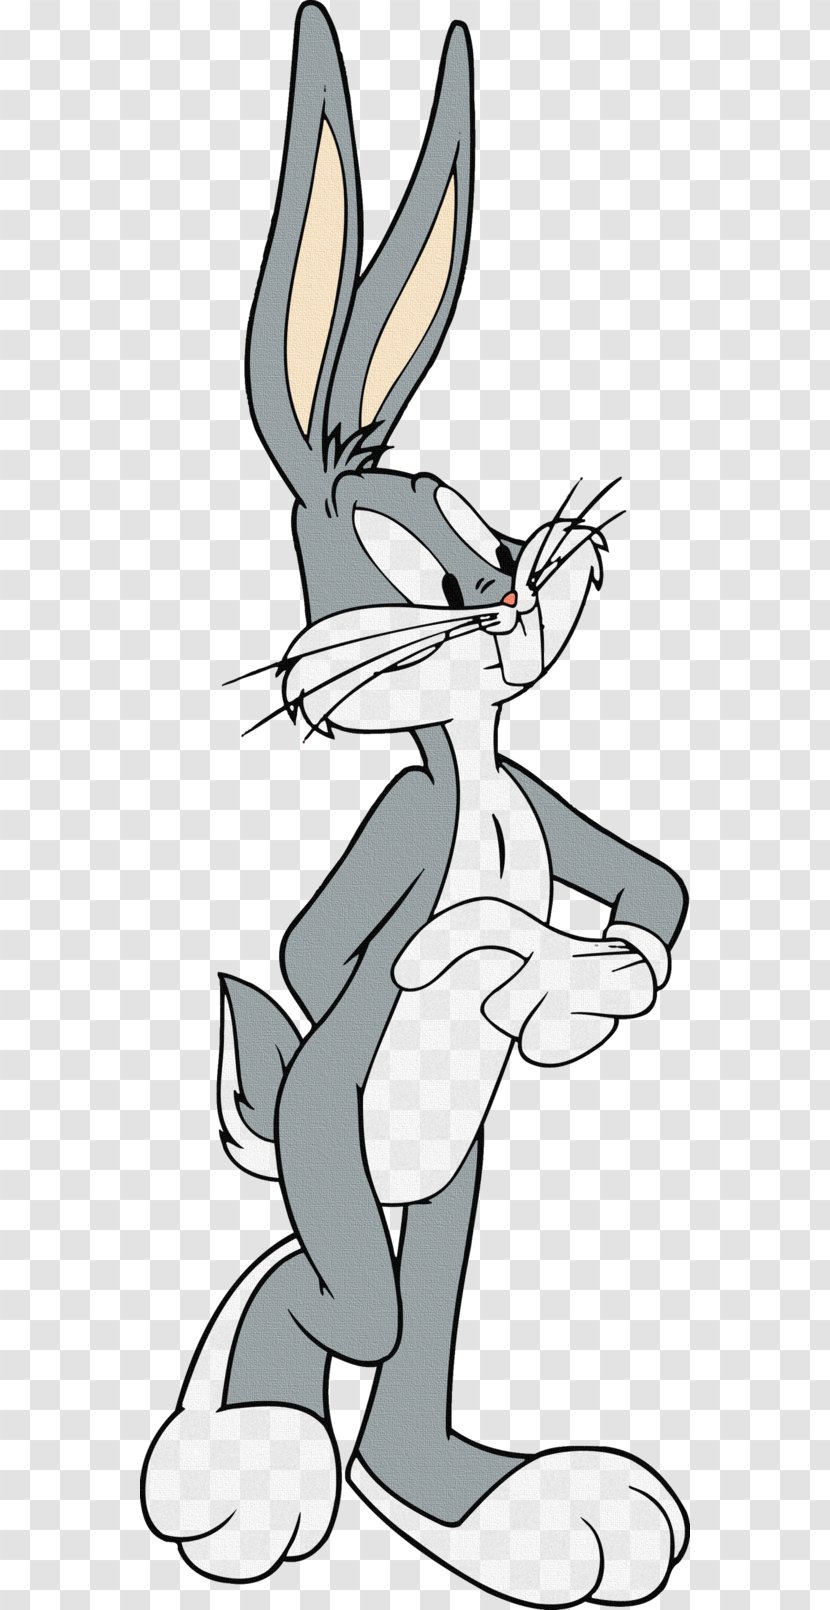 Bugs Bunny Daffy Duck Tweety Clip Art - Tail - Fictional Character Transparent PNG